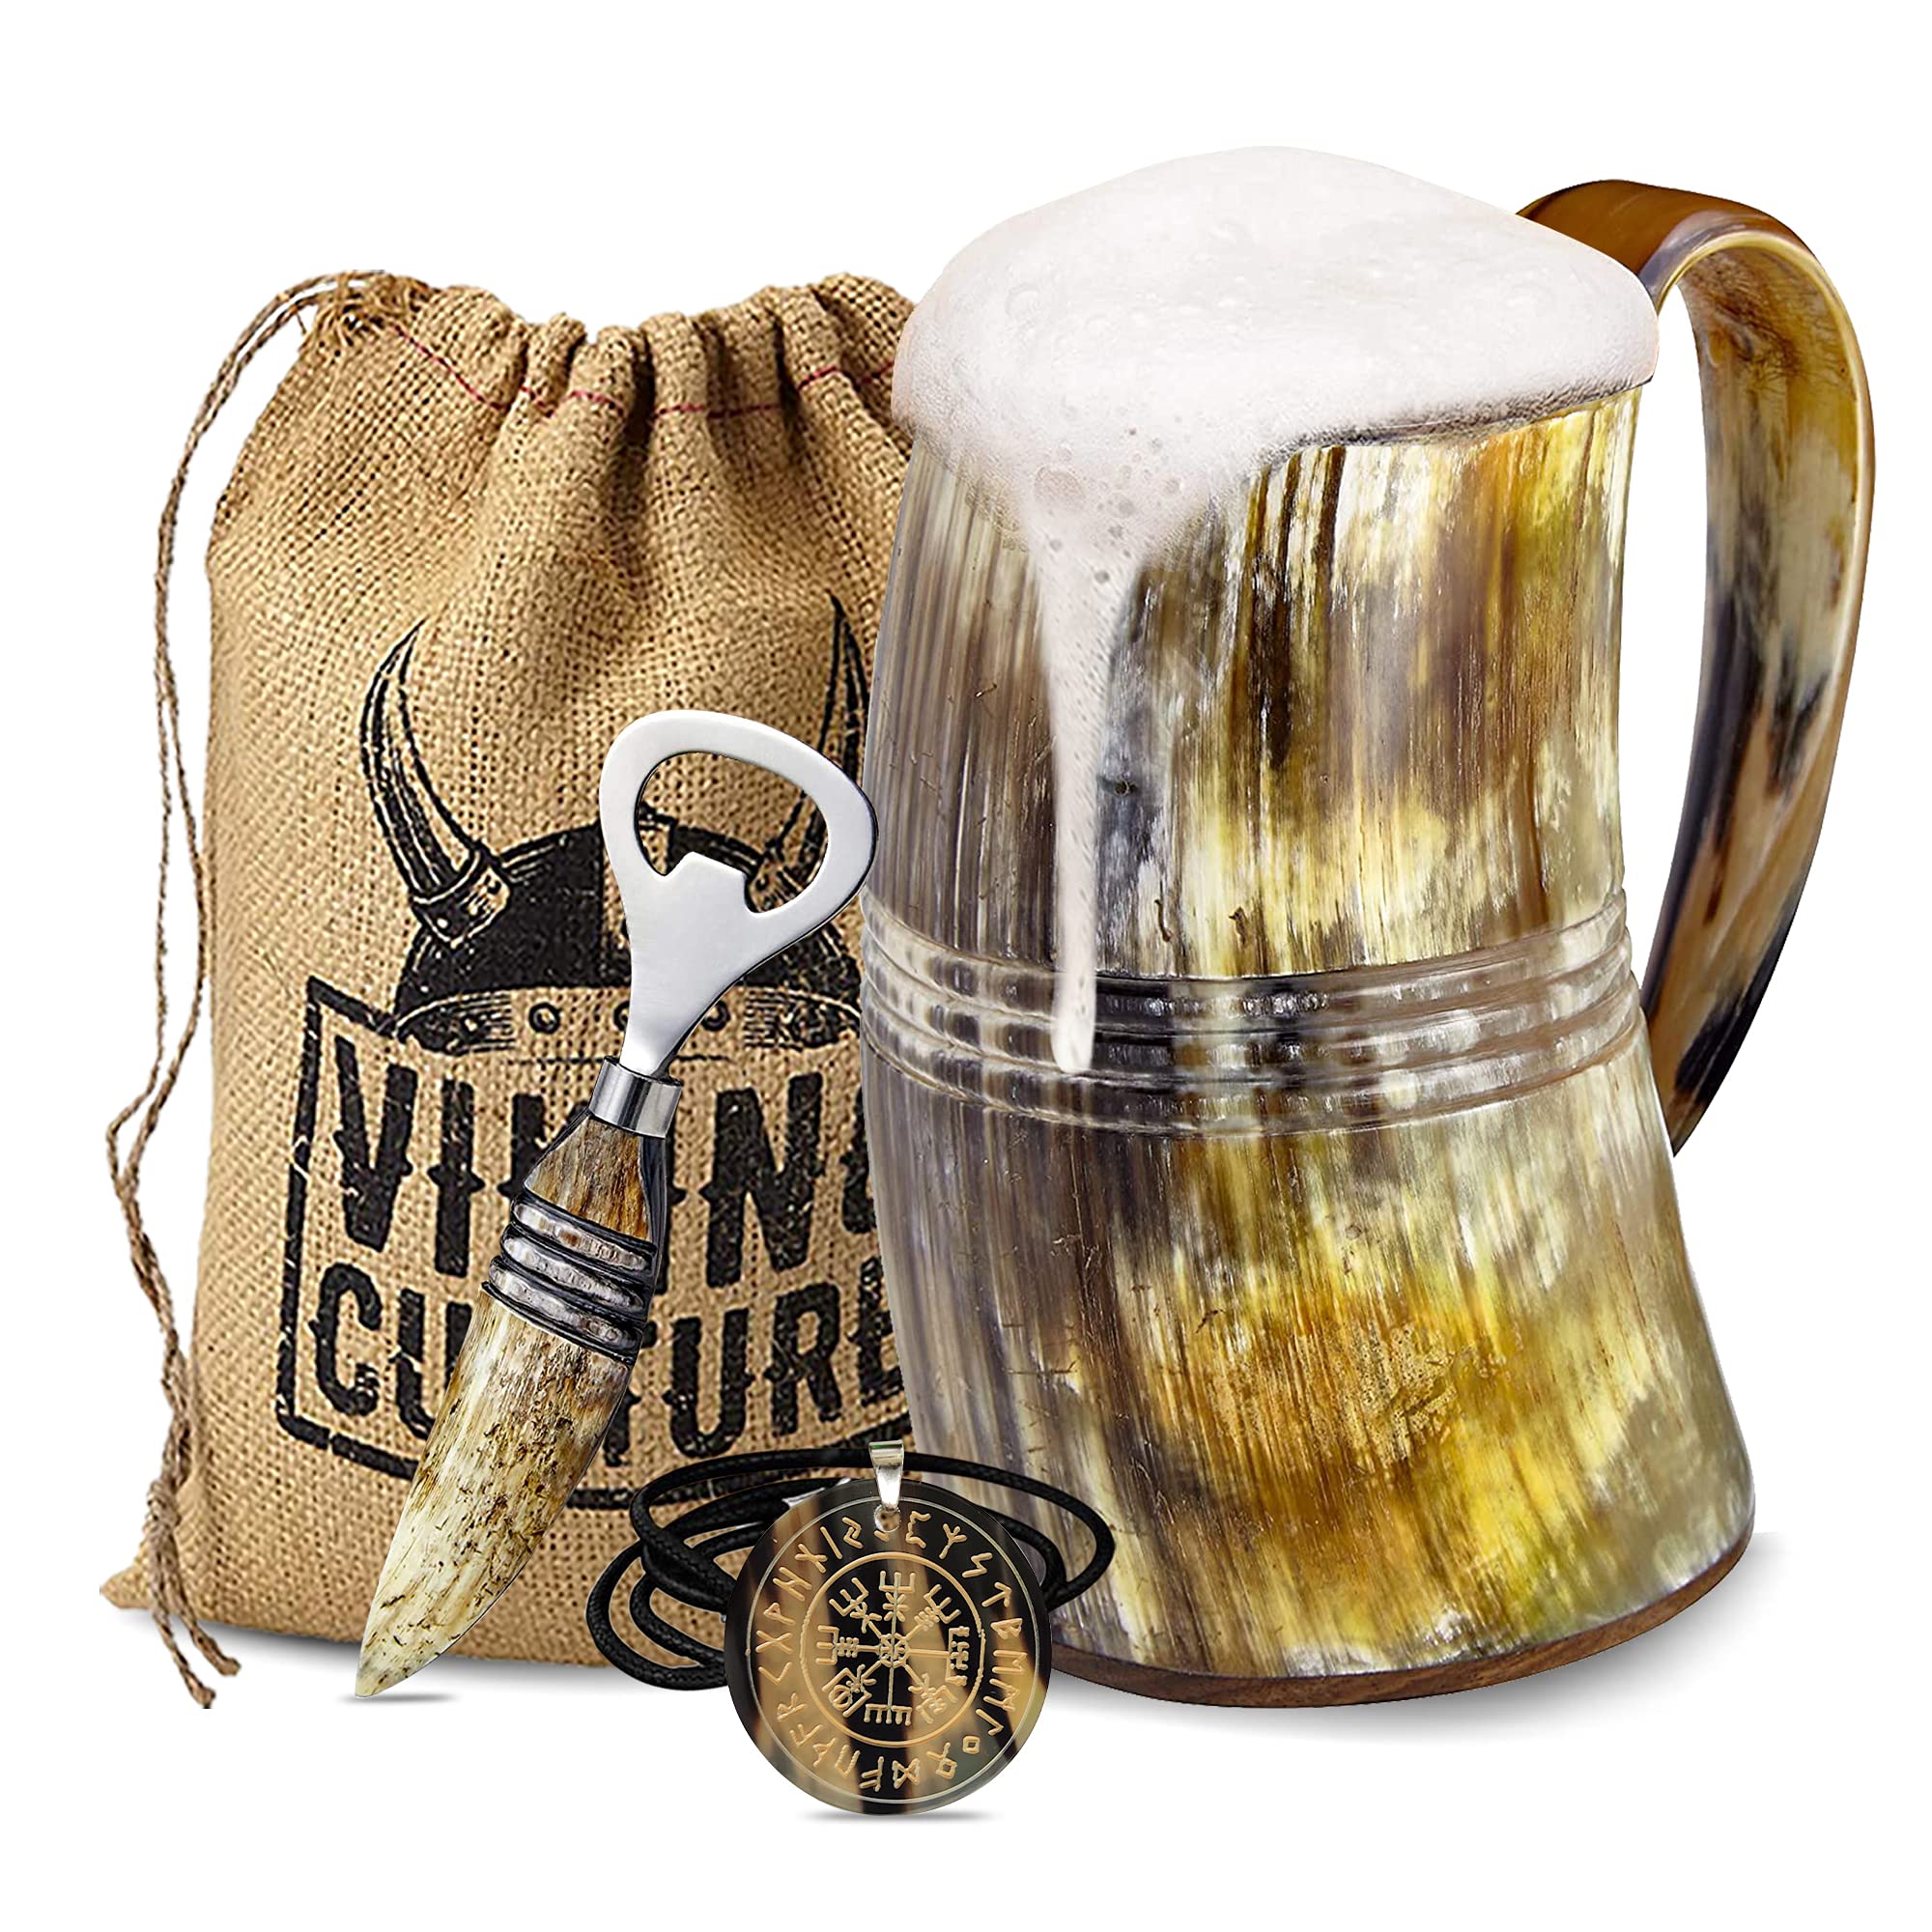 Viking Culture Ox Horn Mug, Norse Pendant, and Bottle Opener (3 Pc